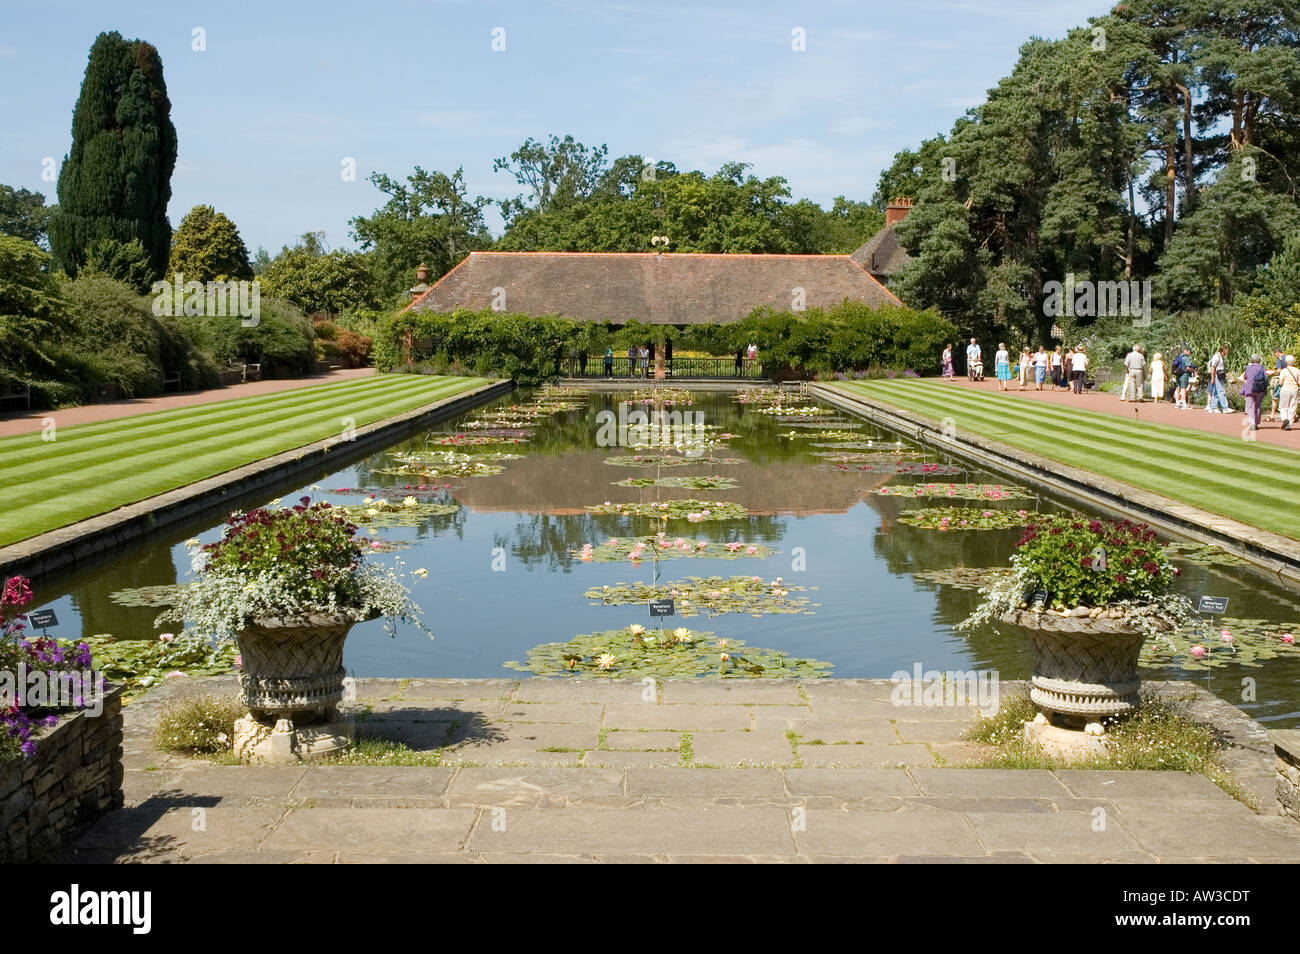 The formal lily pond at RHS Garden Wisley Stock Photo